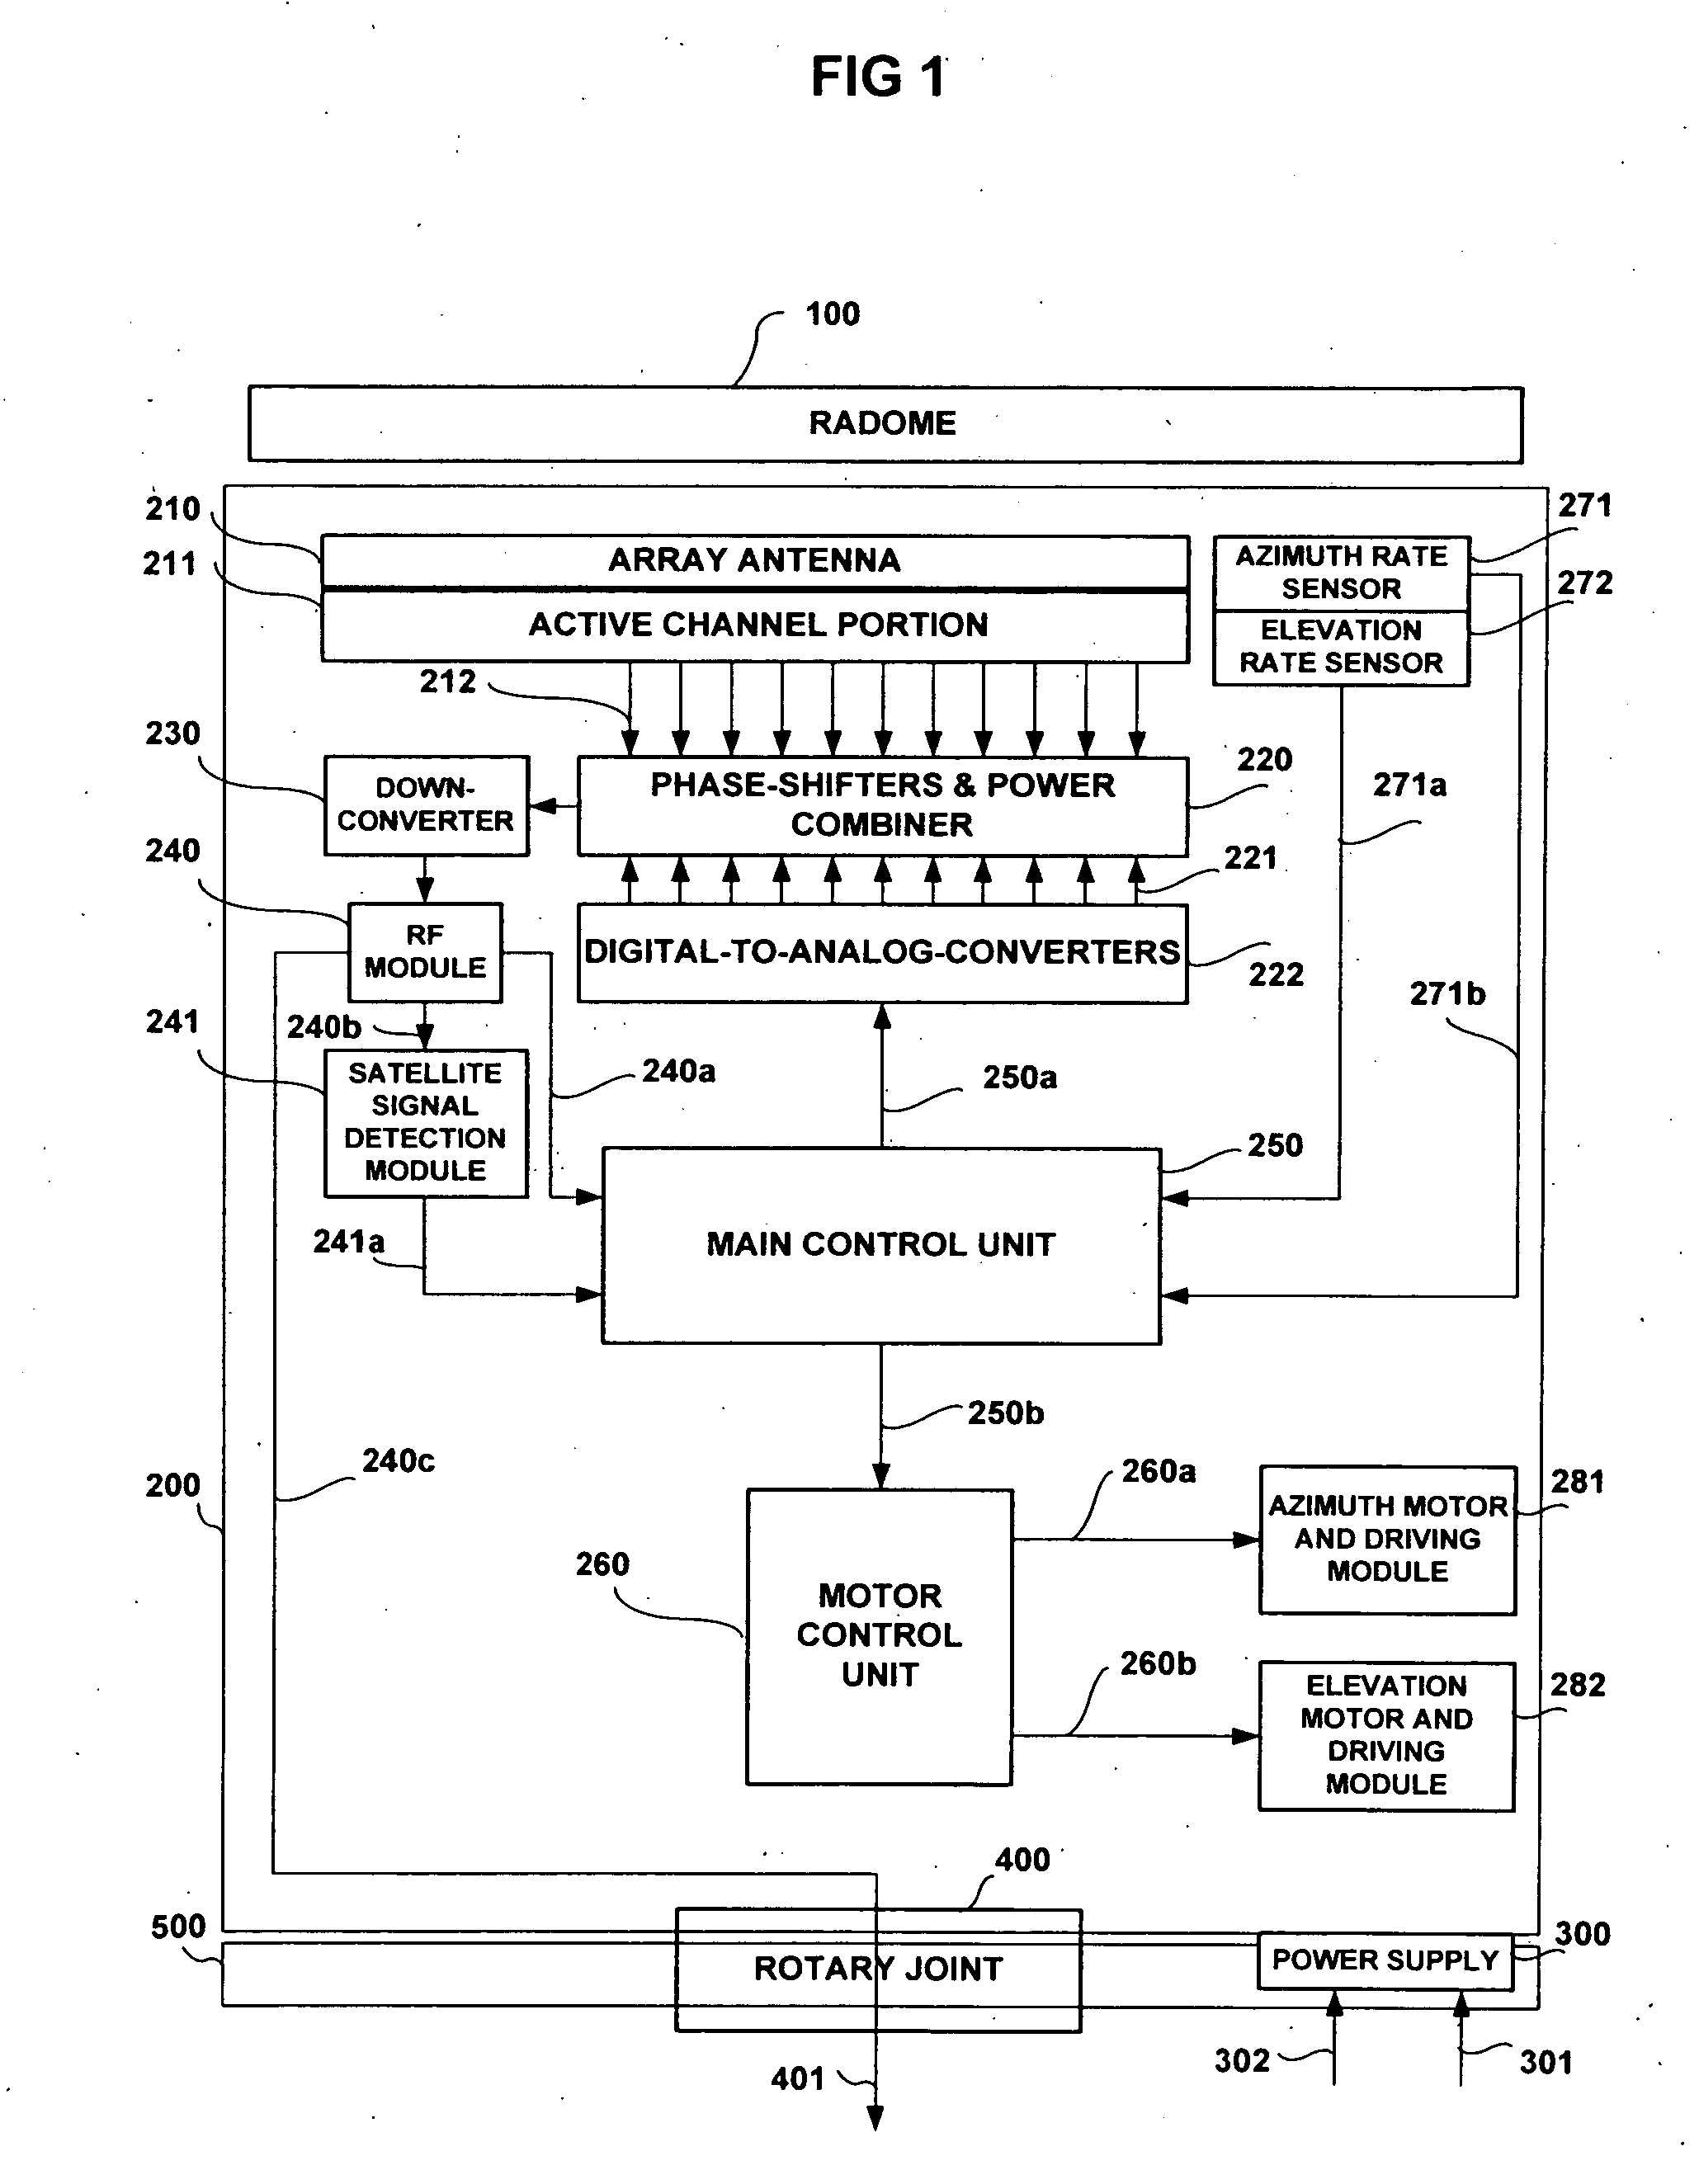 Hybrid tracking control system and method for phased-array antennae